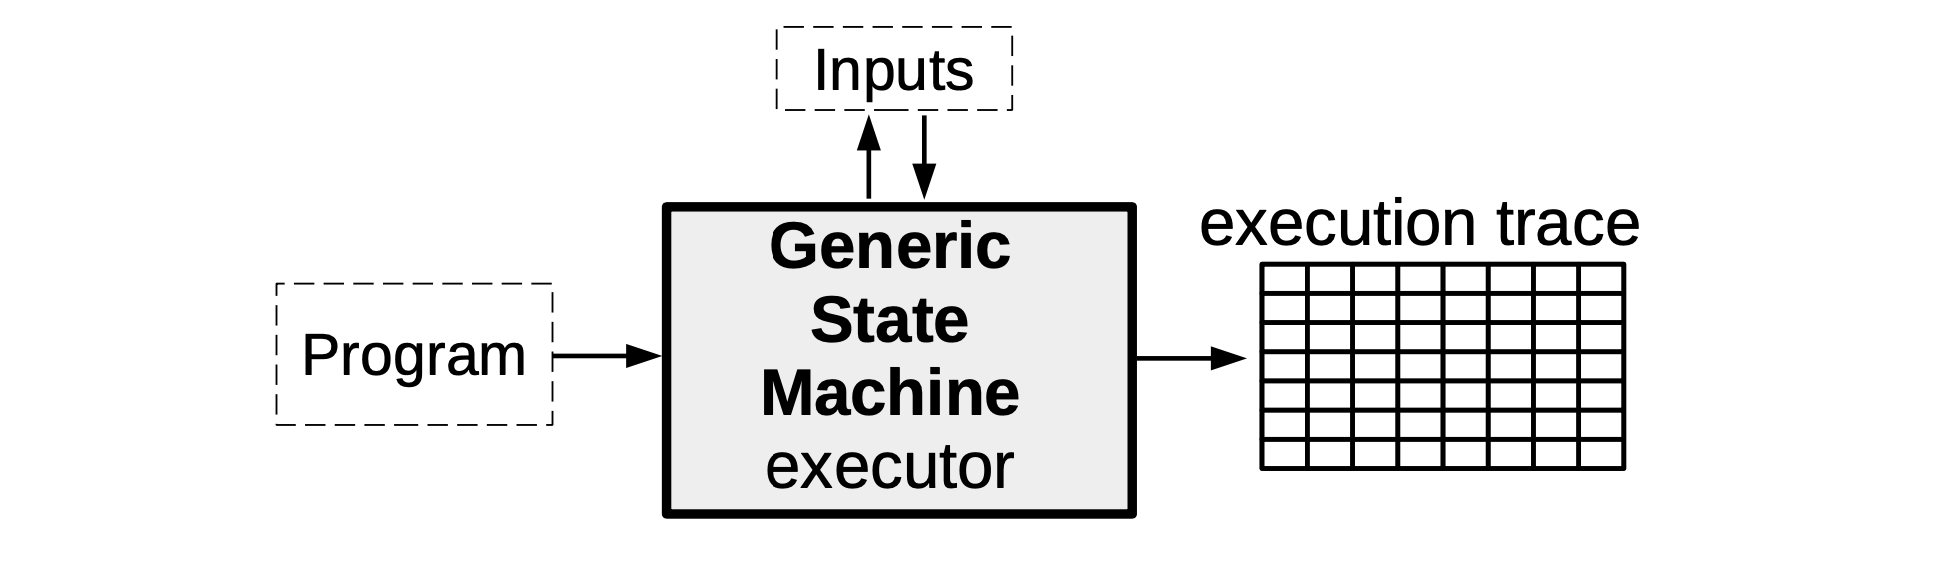 Figure 3: A Generic State Machine producing input- and program-specific execution trace 